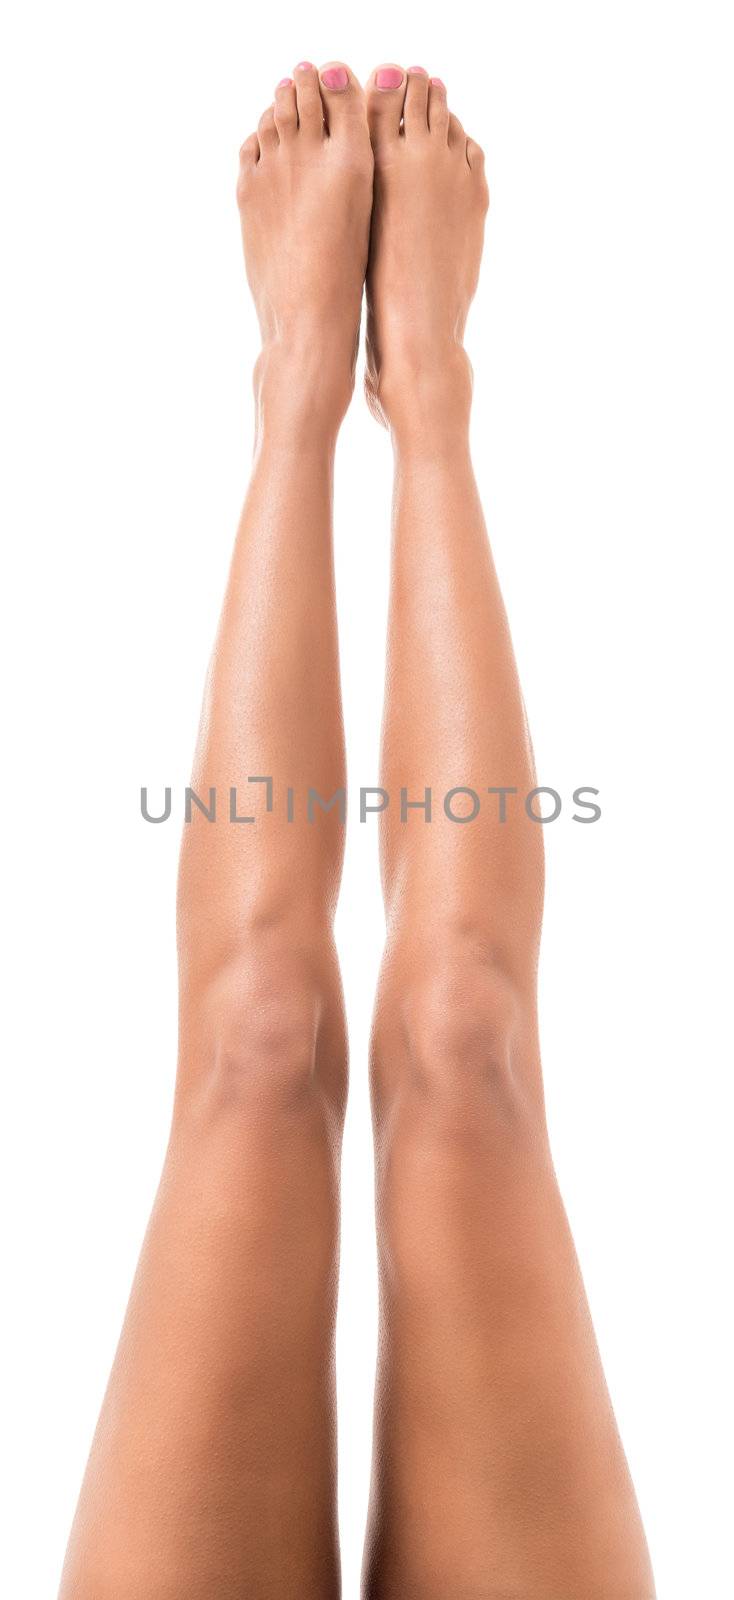 female crossed legs isolated on white background